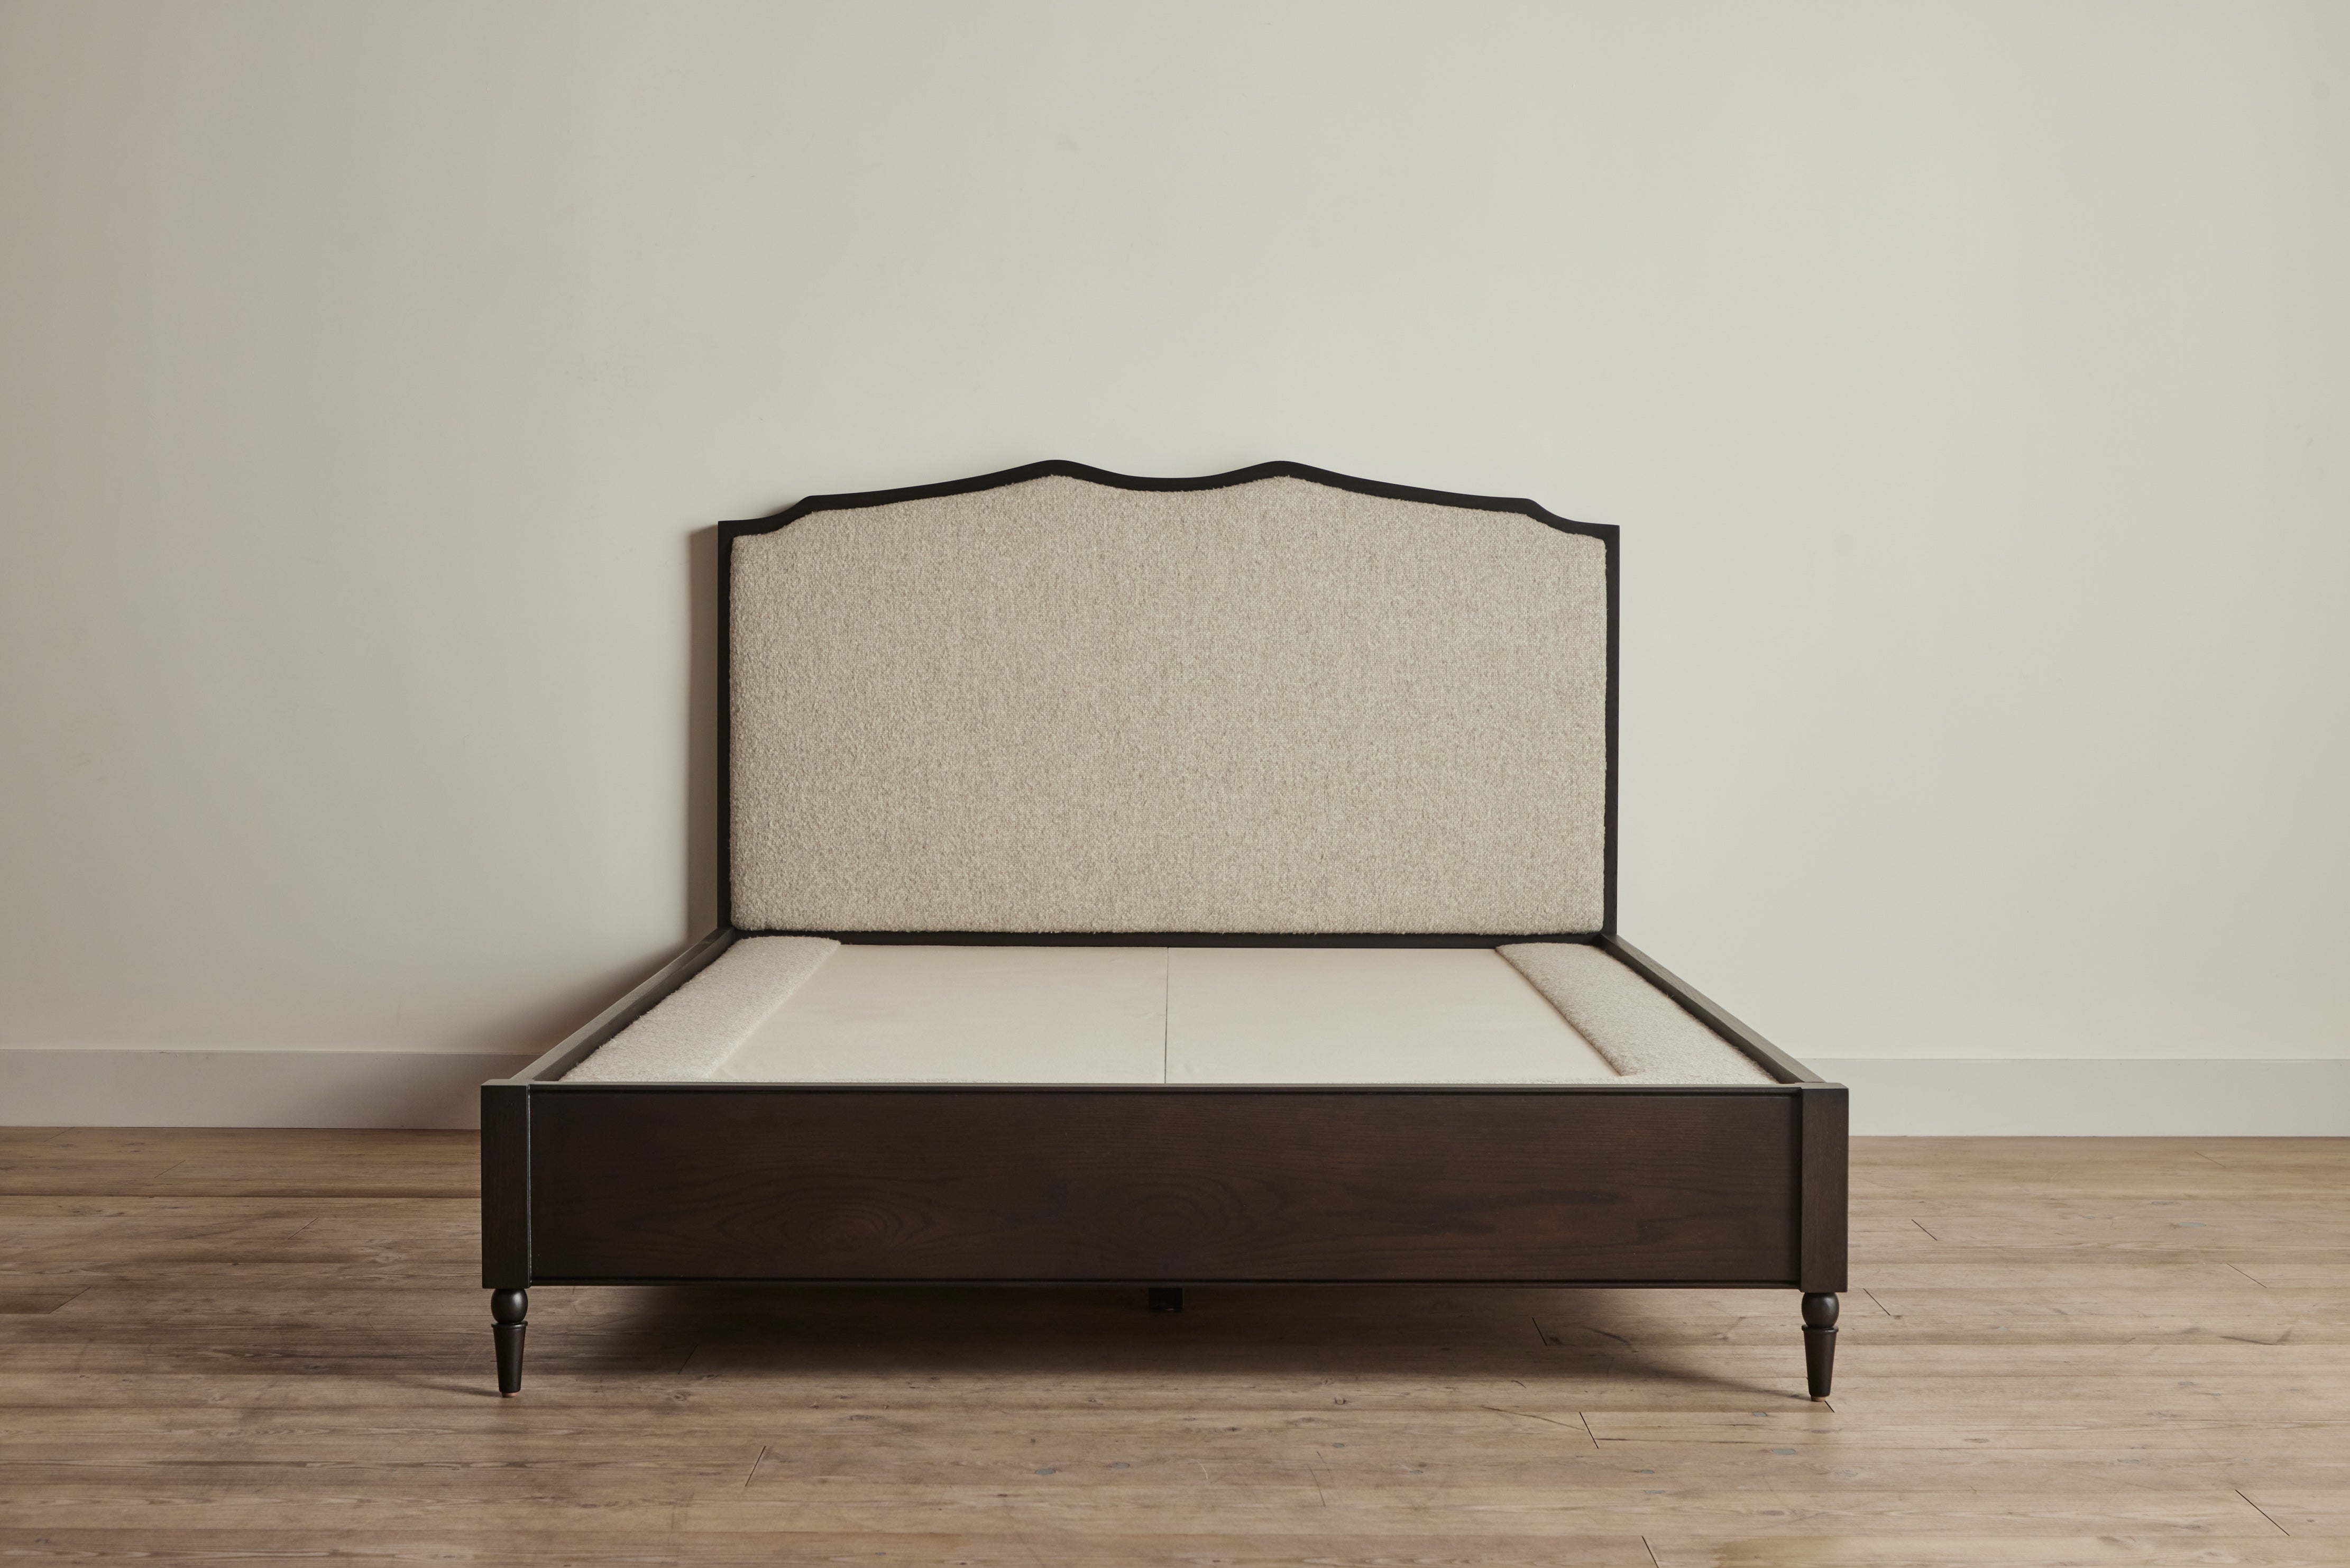 Nickey Kehoe Curved Bed - In Stock